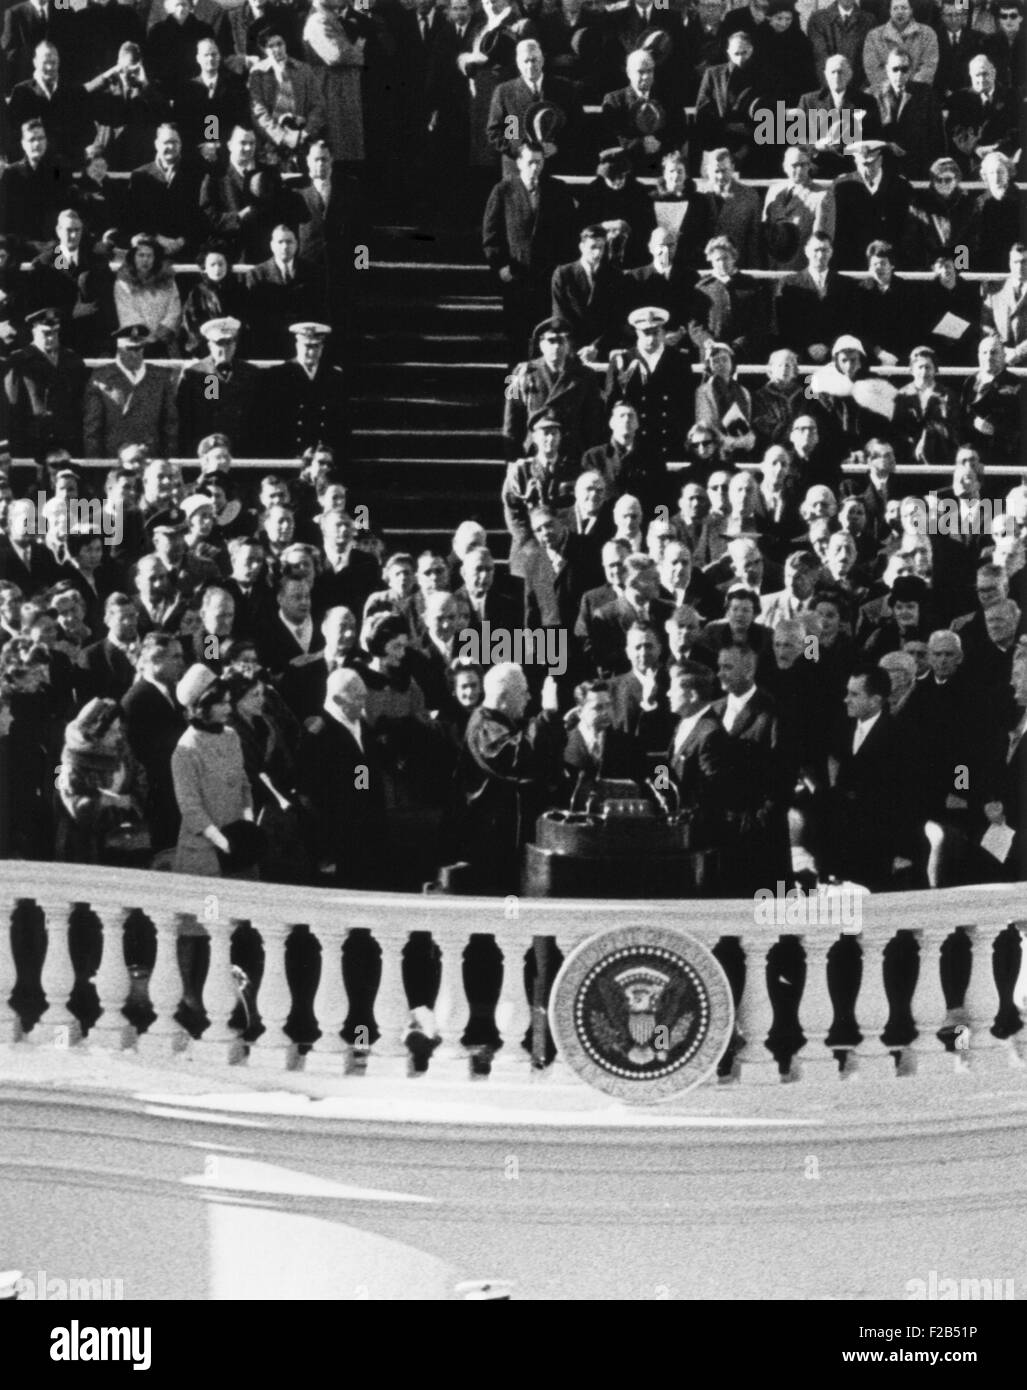 President John Kennedy takes the oath of office administered by Chief Justice Earl Warren. Jan. 20, 1961. - (BSLOC 2015 1 145) Stock Photo